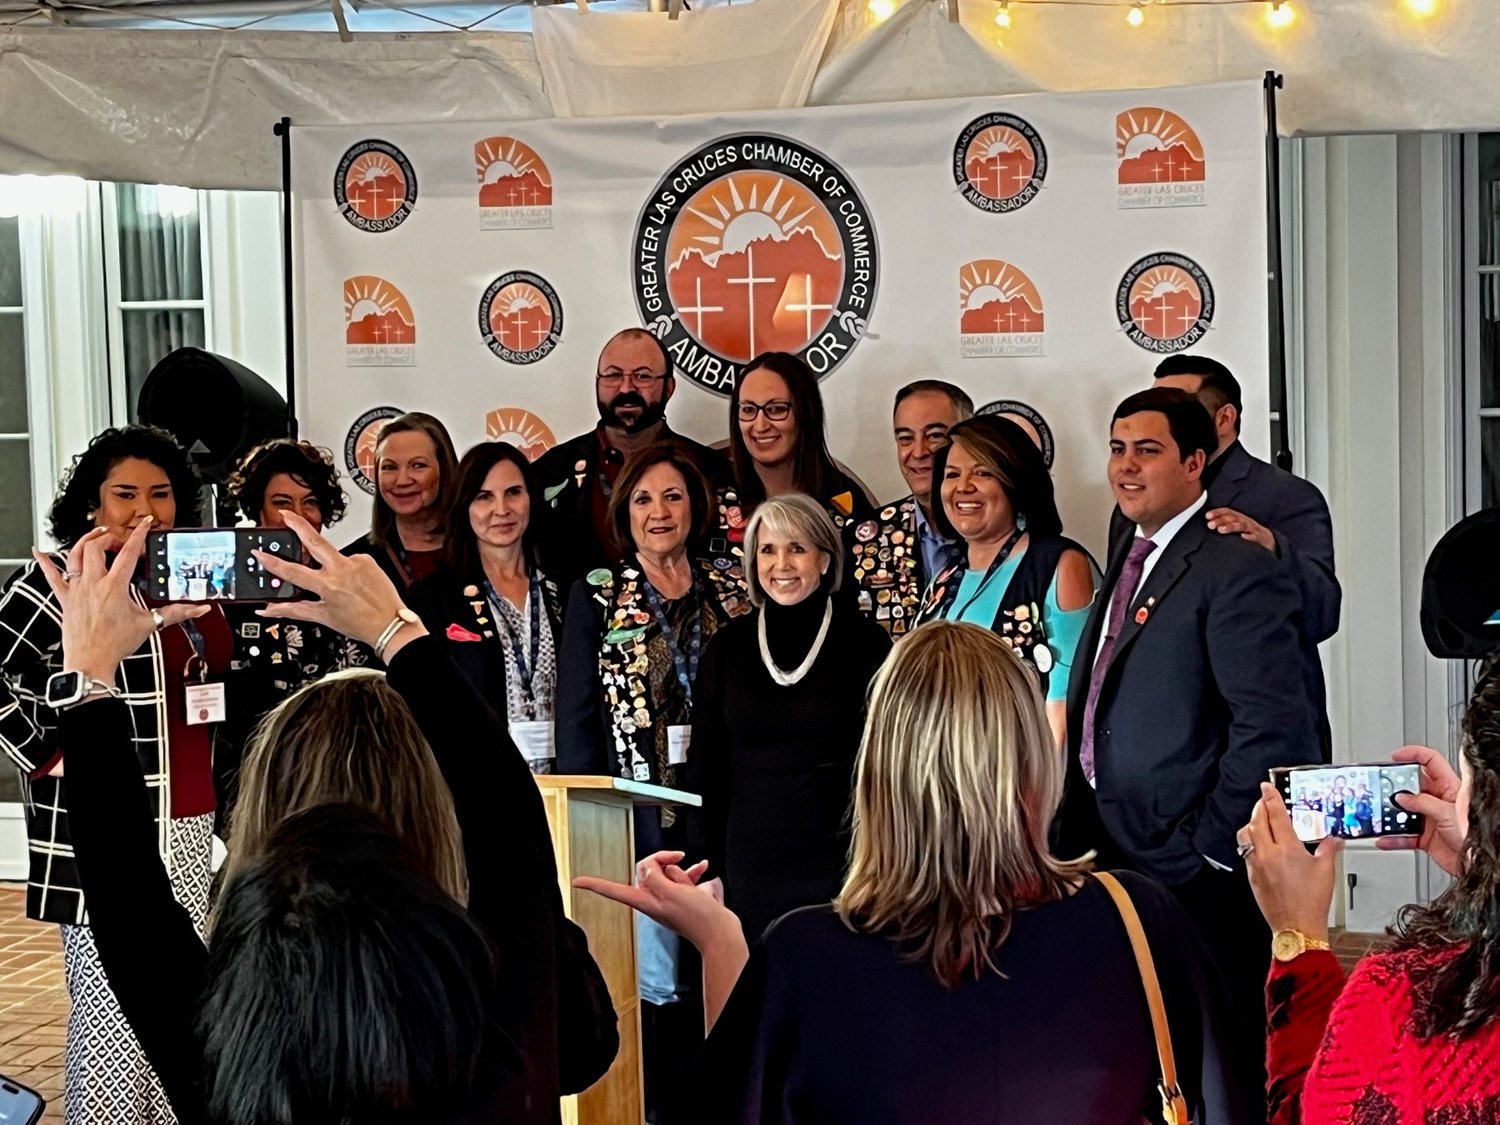 Members of the Greater Las Cruces Chamber of Commerce Ambassadors, who helped organize the event, pose for a photo with Gov. Michelle Lujan Grisham.